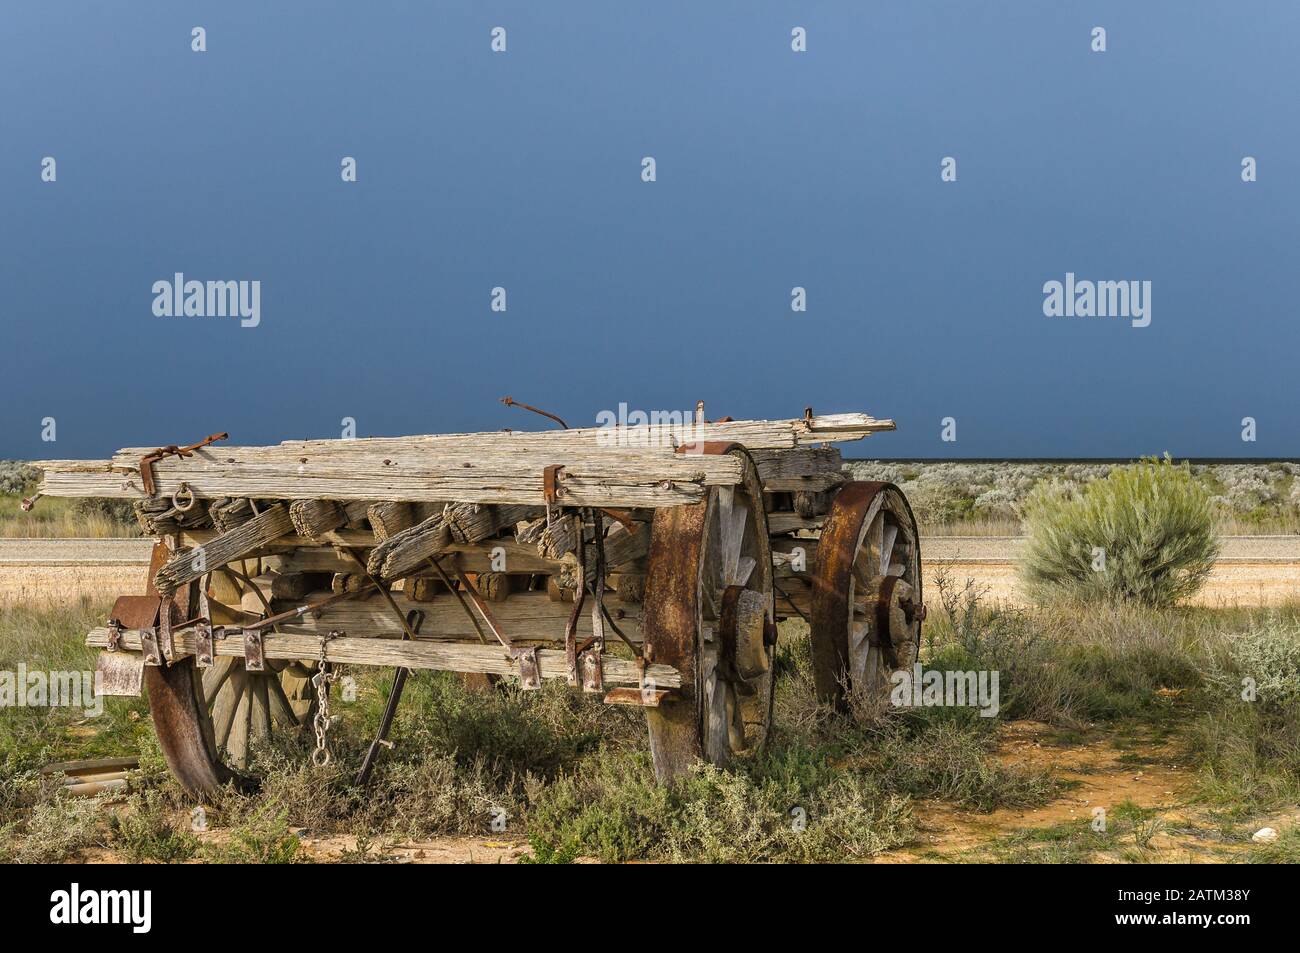 Historical old wagon transport on display on the Nullarbor Plain with dramatic storm threatening. Stock Photo